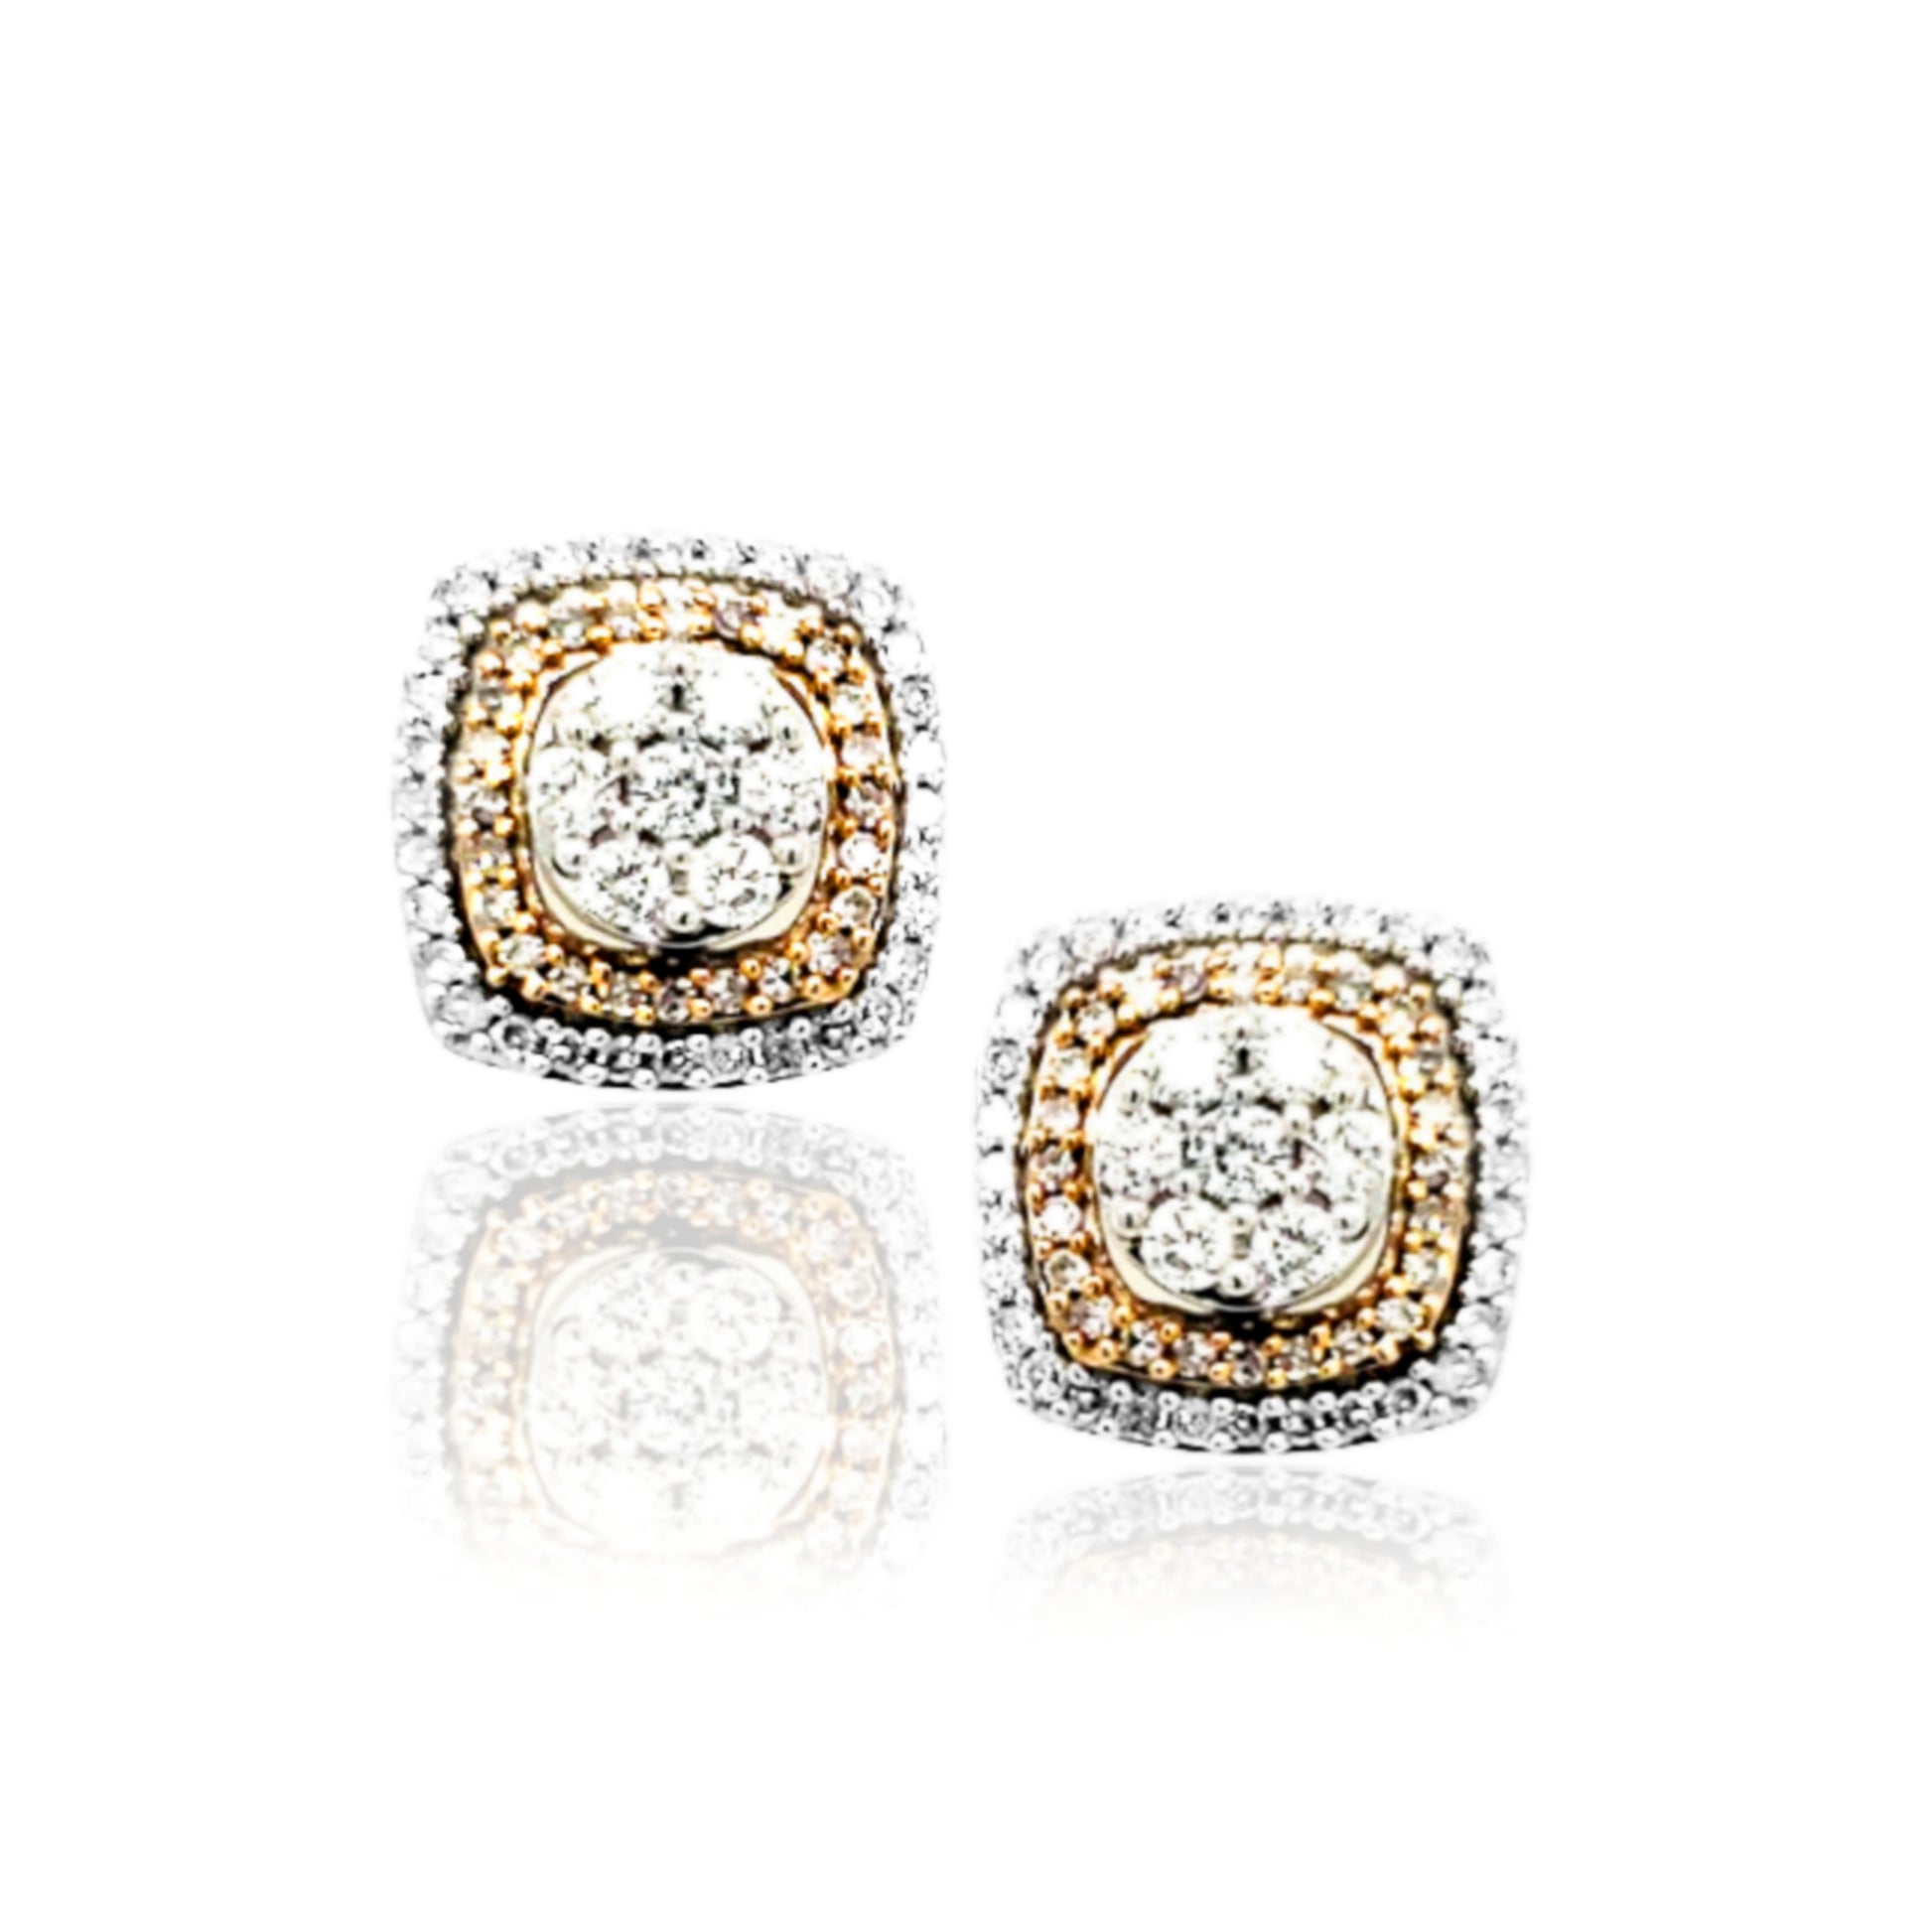 10K Two Tone Gold And Diamond Square Shaped Stud Earrings - HK Jewels